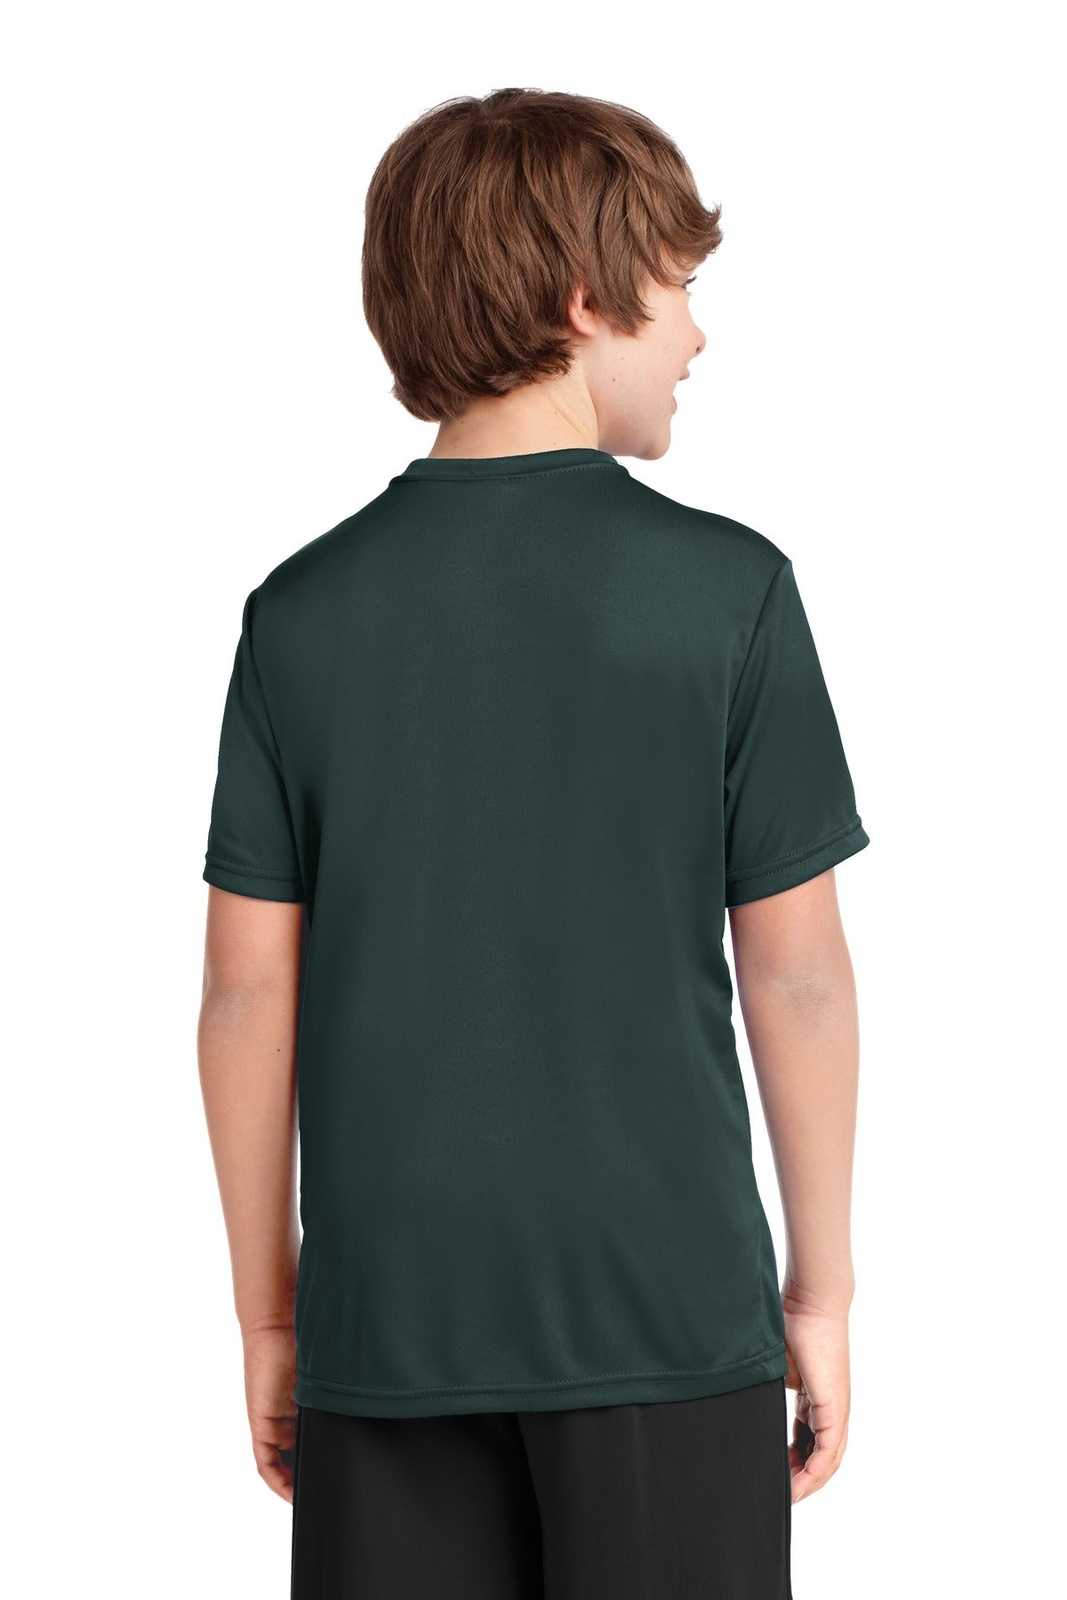 Port &amp; Company PC380Y Youth Performance Tee - Dark Green - HIT a Double - 2